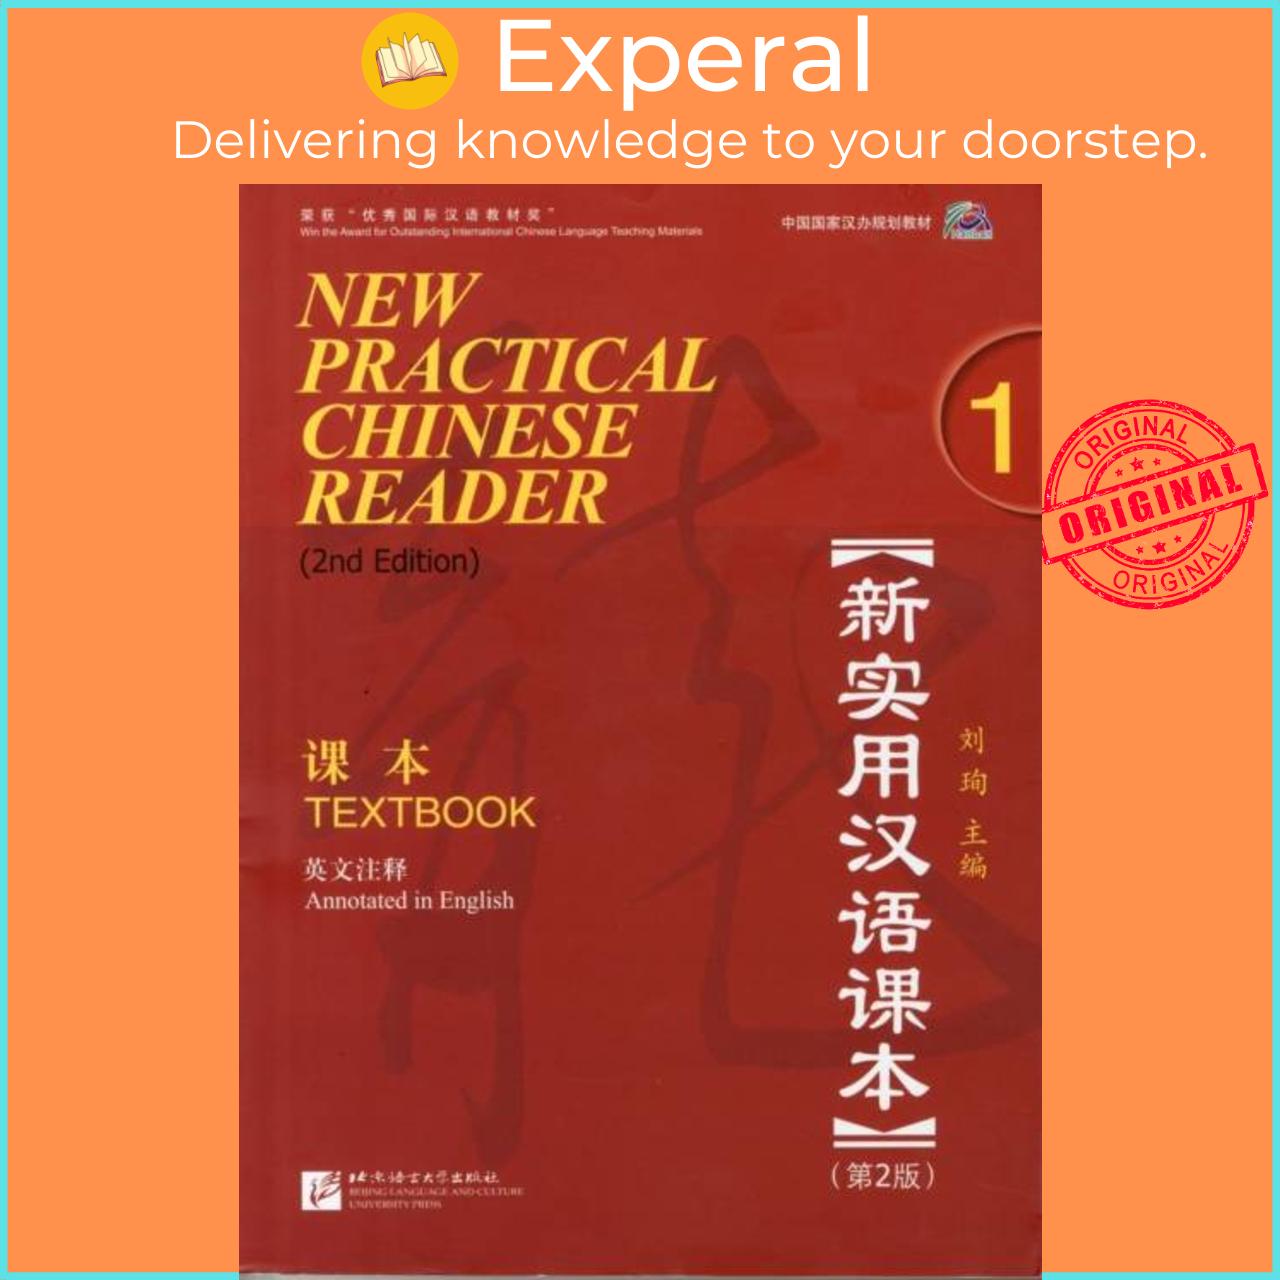 Sách - New Practical Chinese Reader vol.1 - Textbook by Liu Xun (UK edition, paperback)